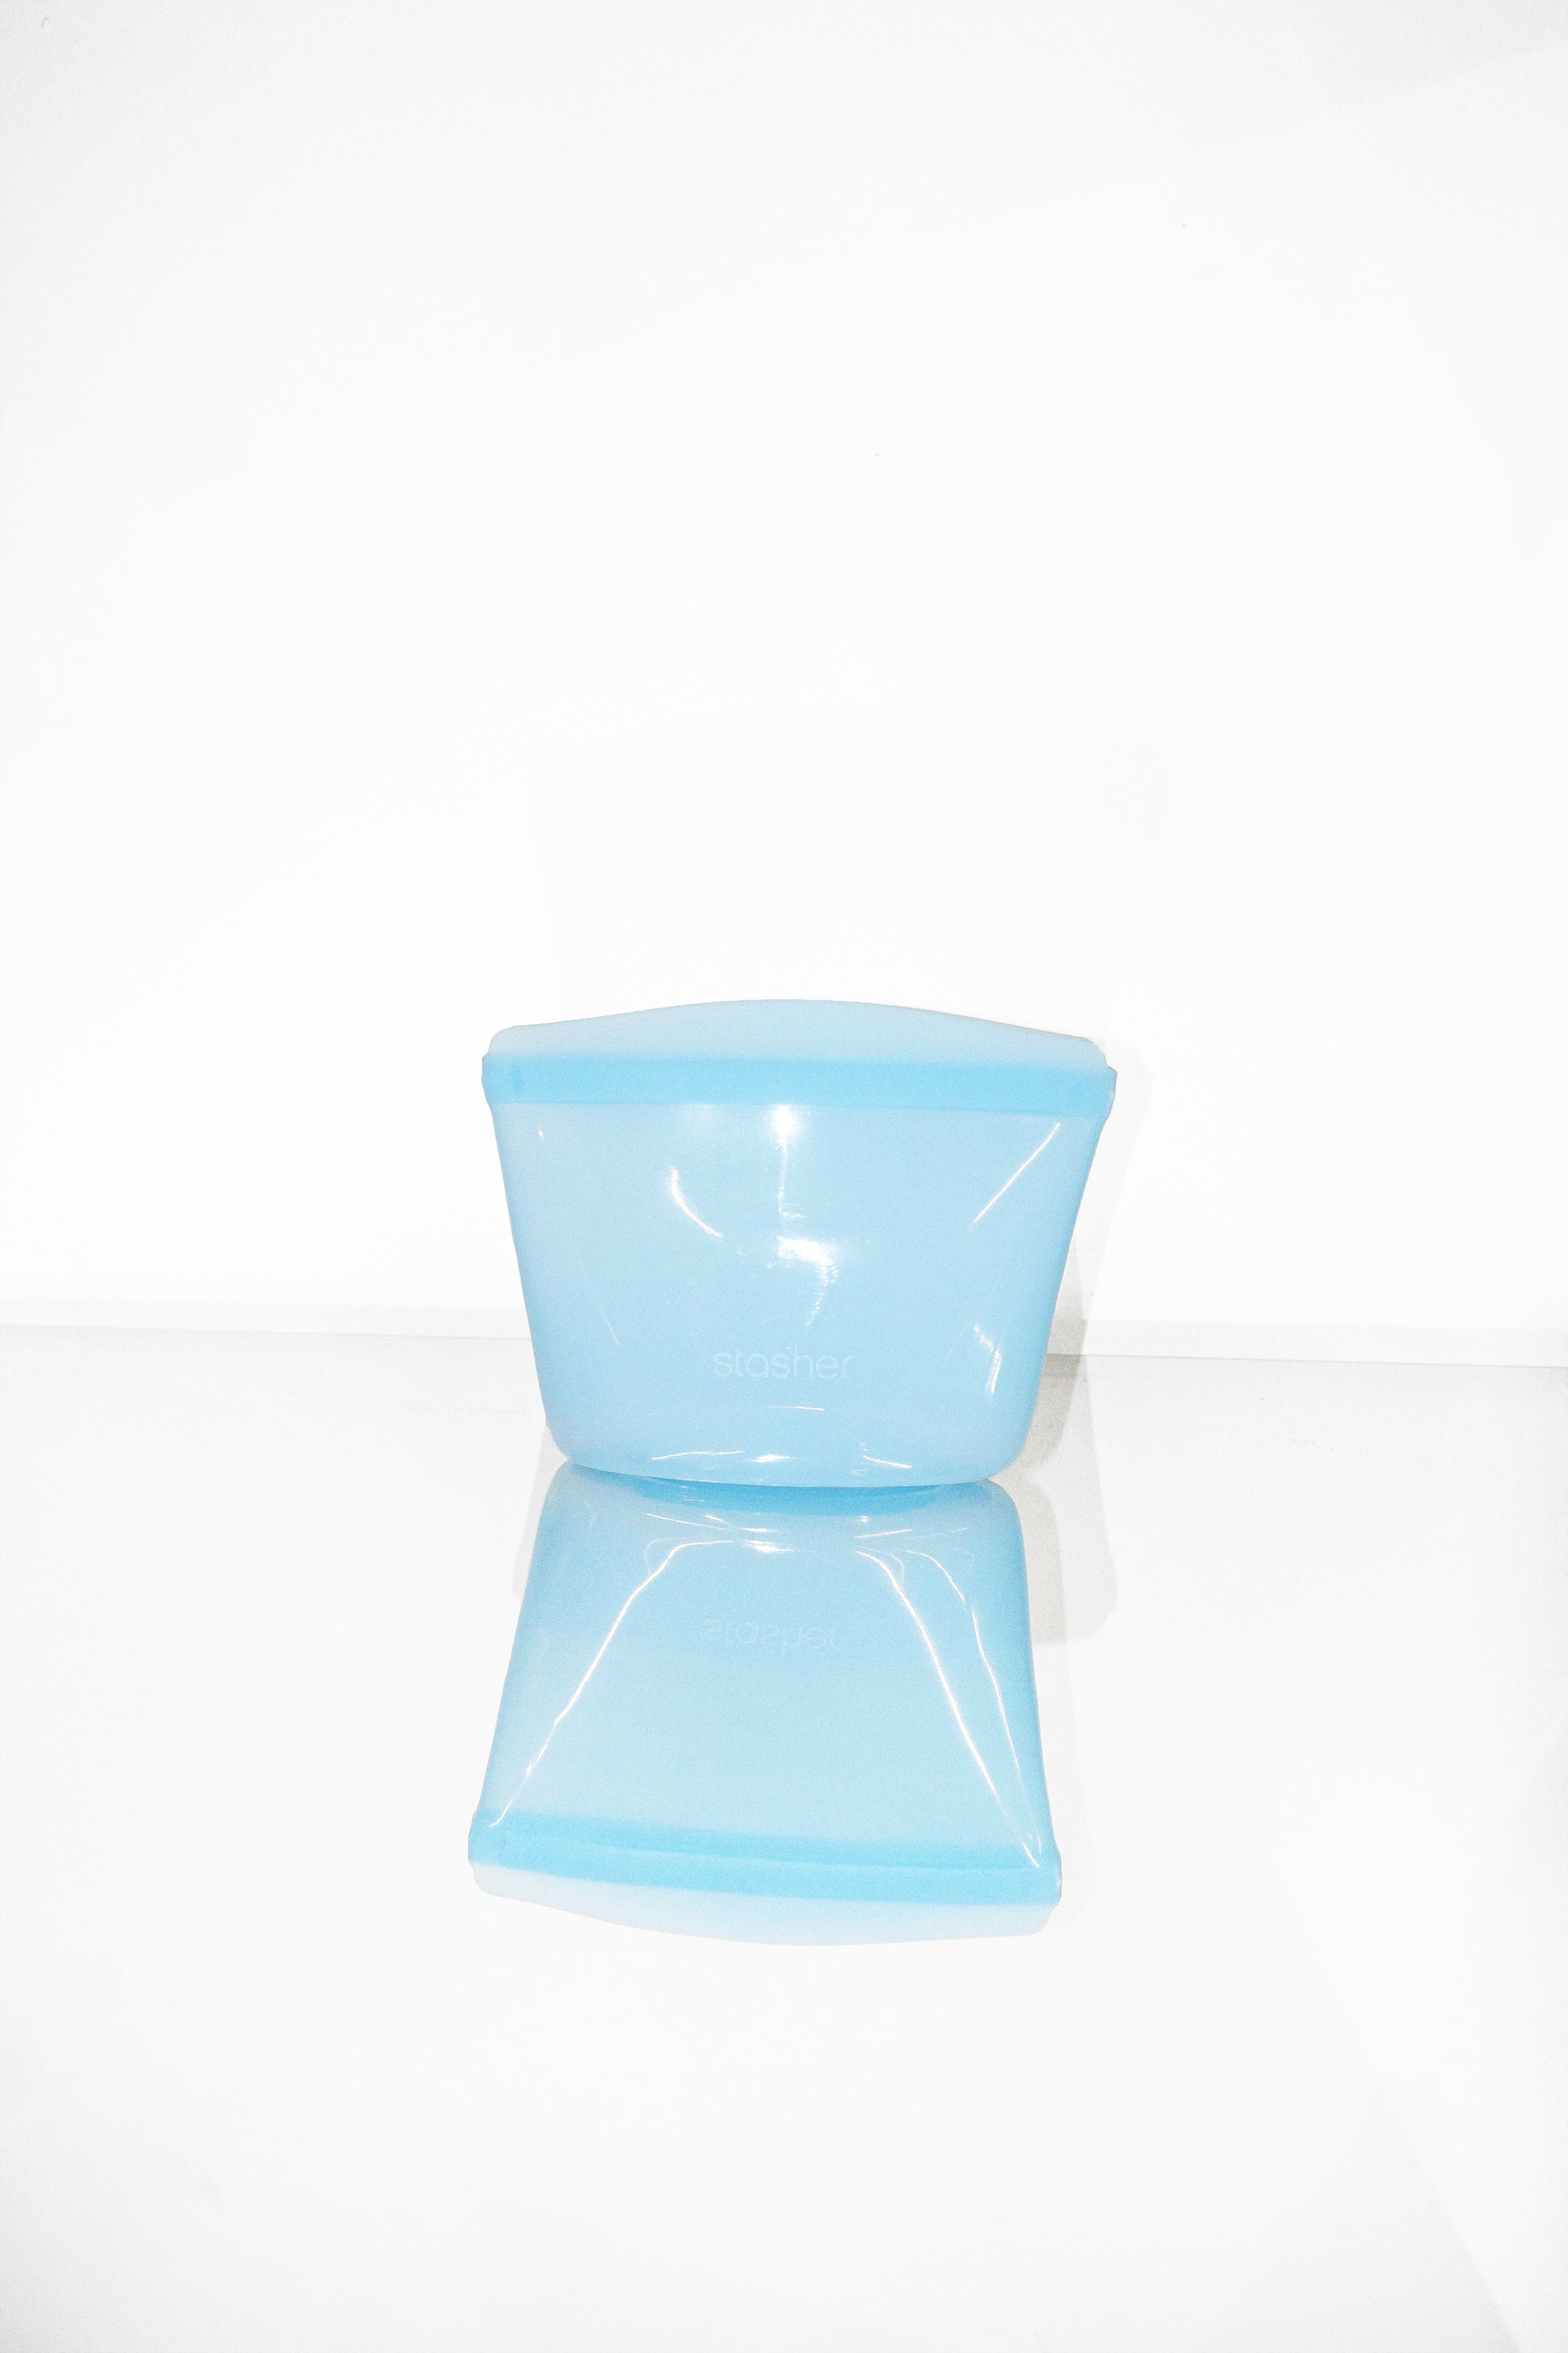 Stasher Bowl, 4-Cup